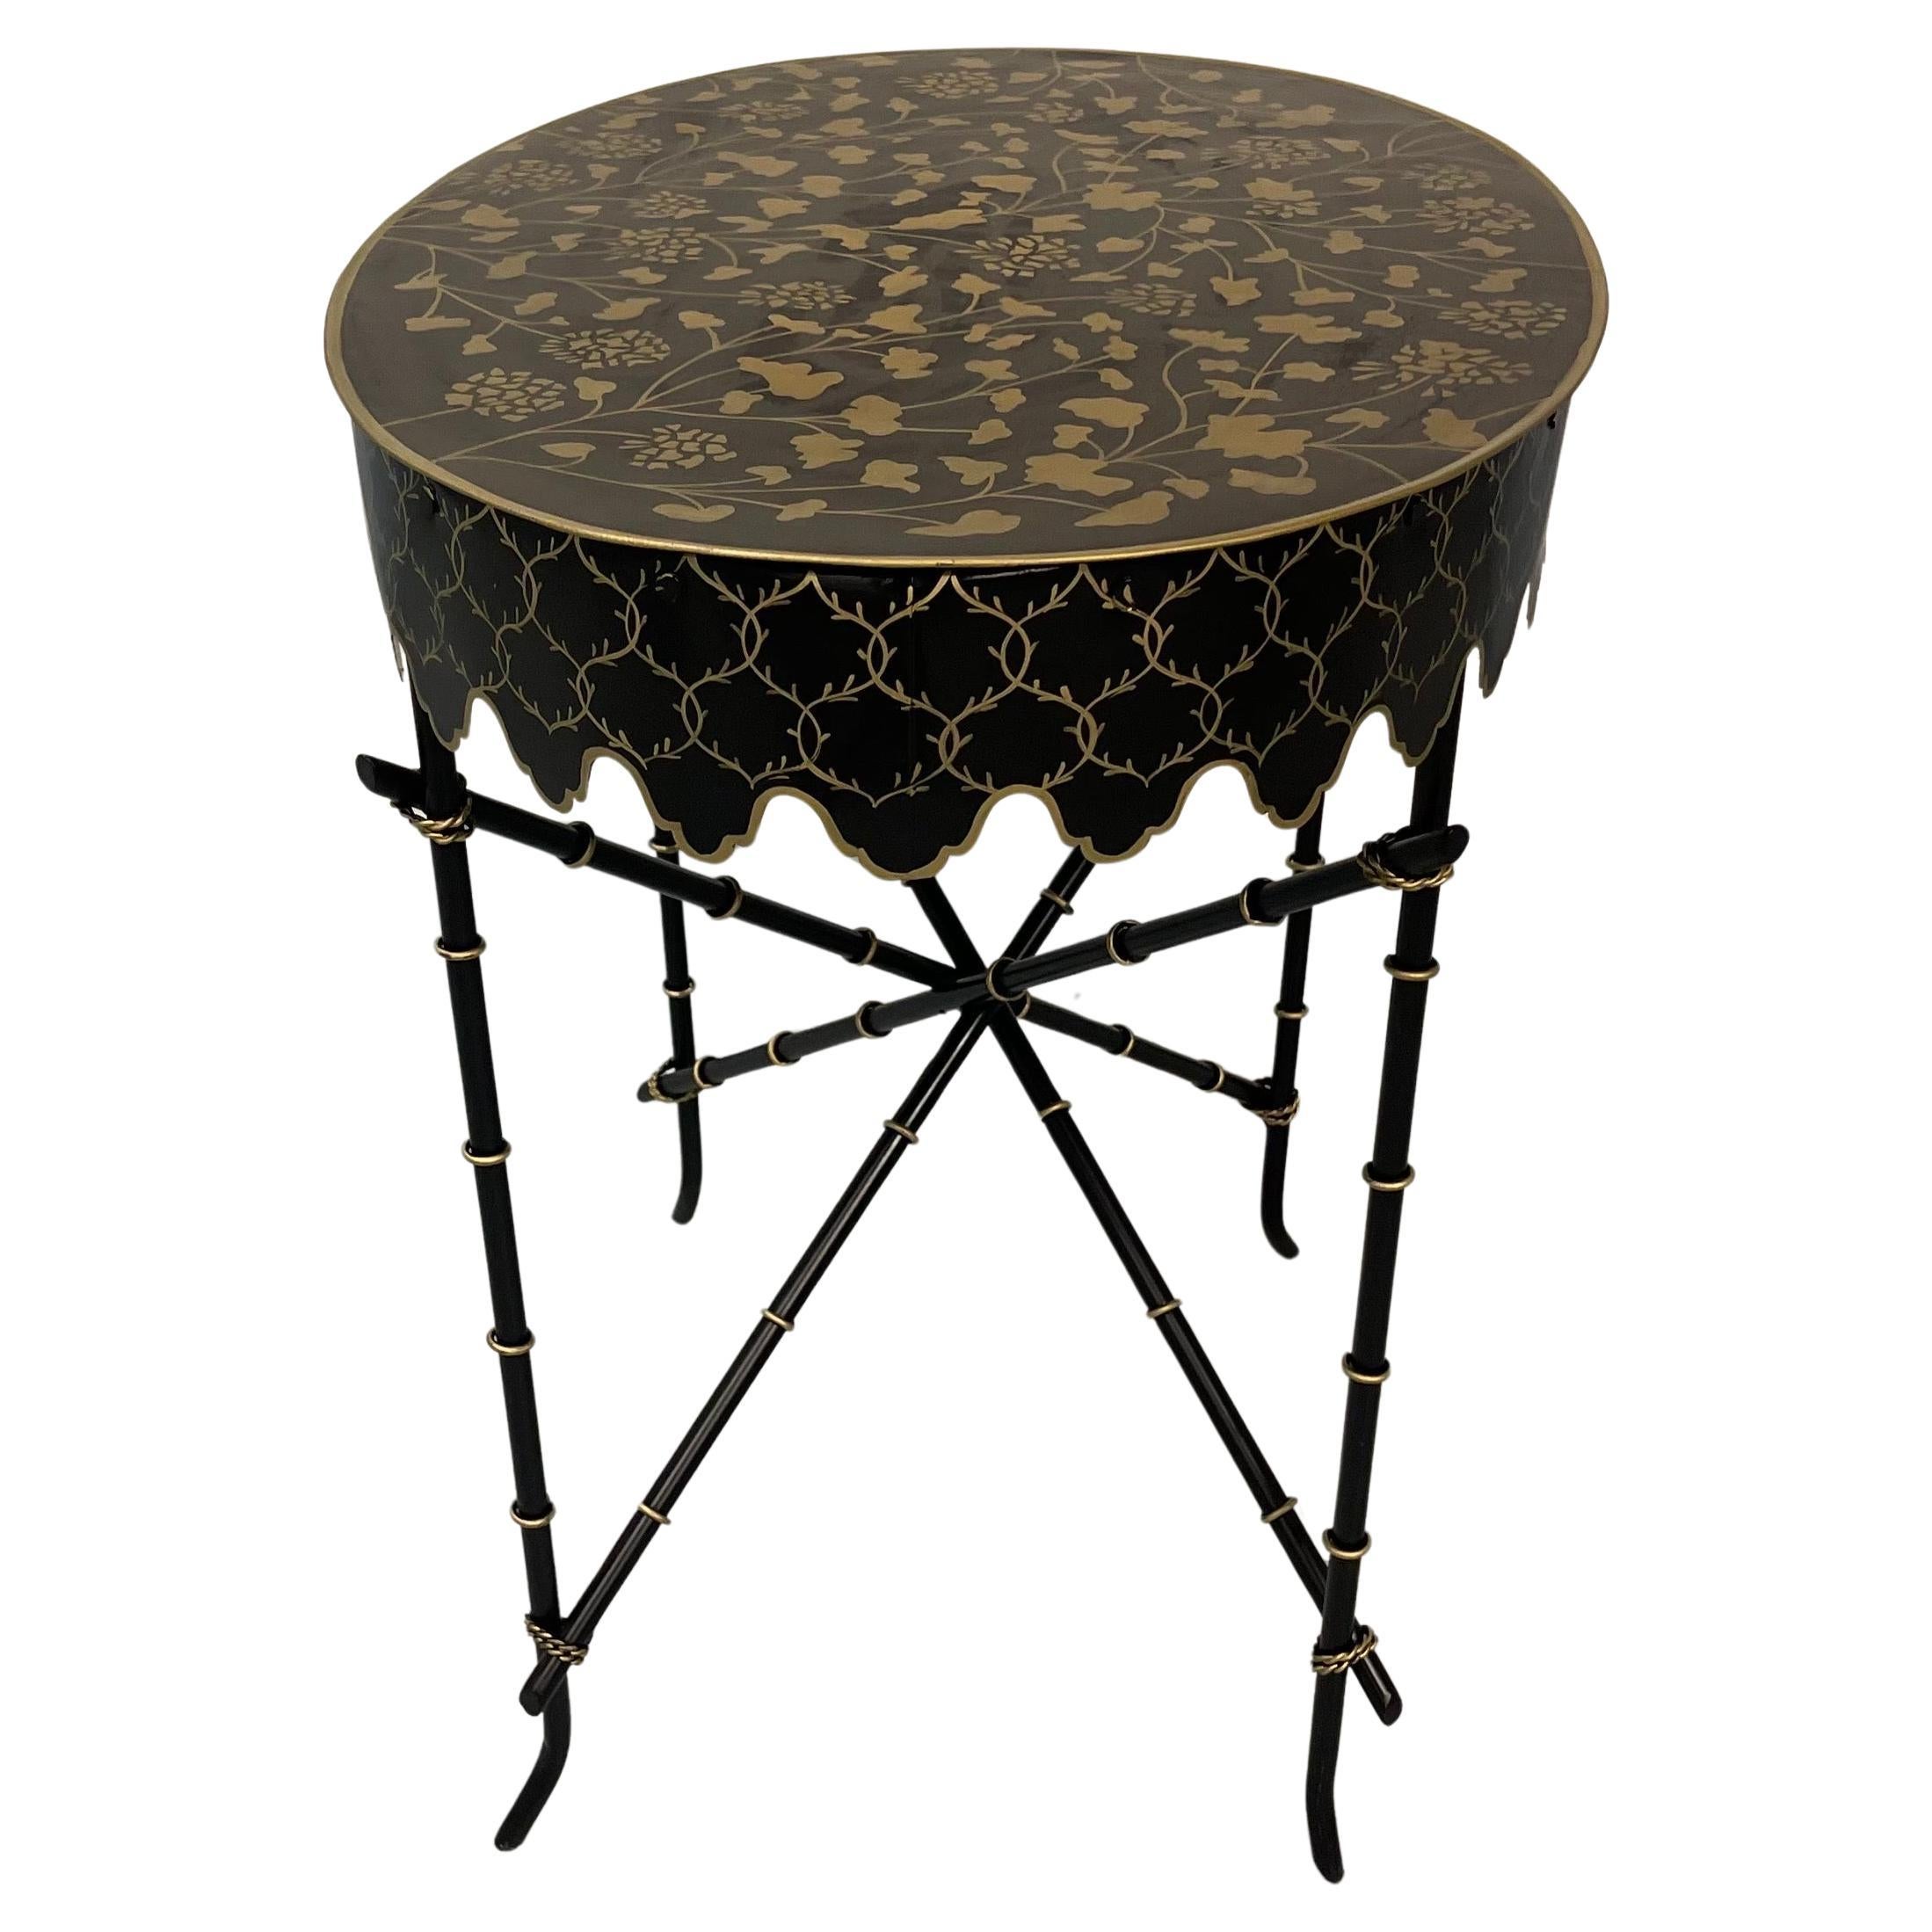 Chinoiserie Wonderful Bamboo Oval Handpainted Tole Scalloped Side End Coffee Cocktail Tables For Sale